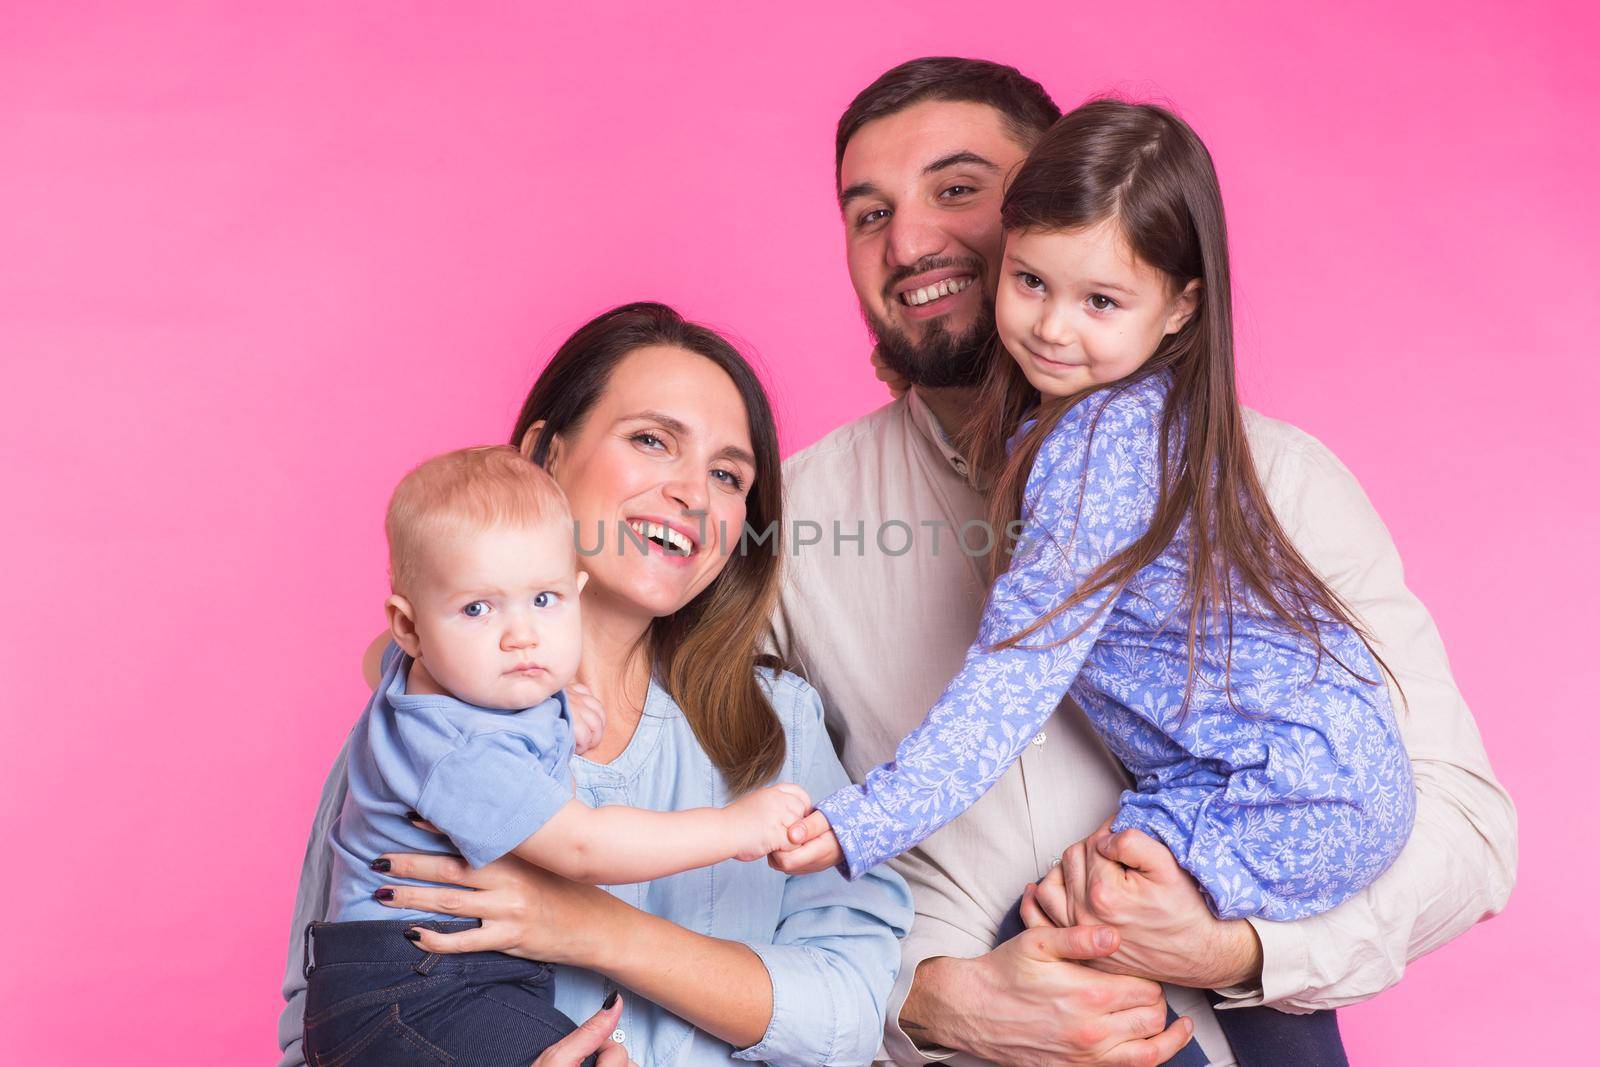 Cute family posing and smiling at camera together on pink background.